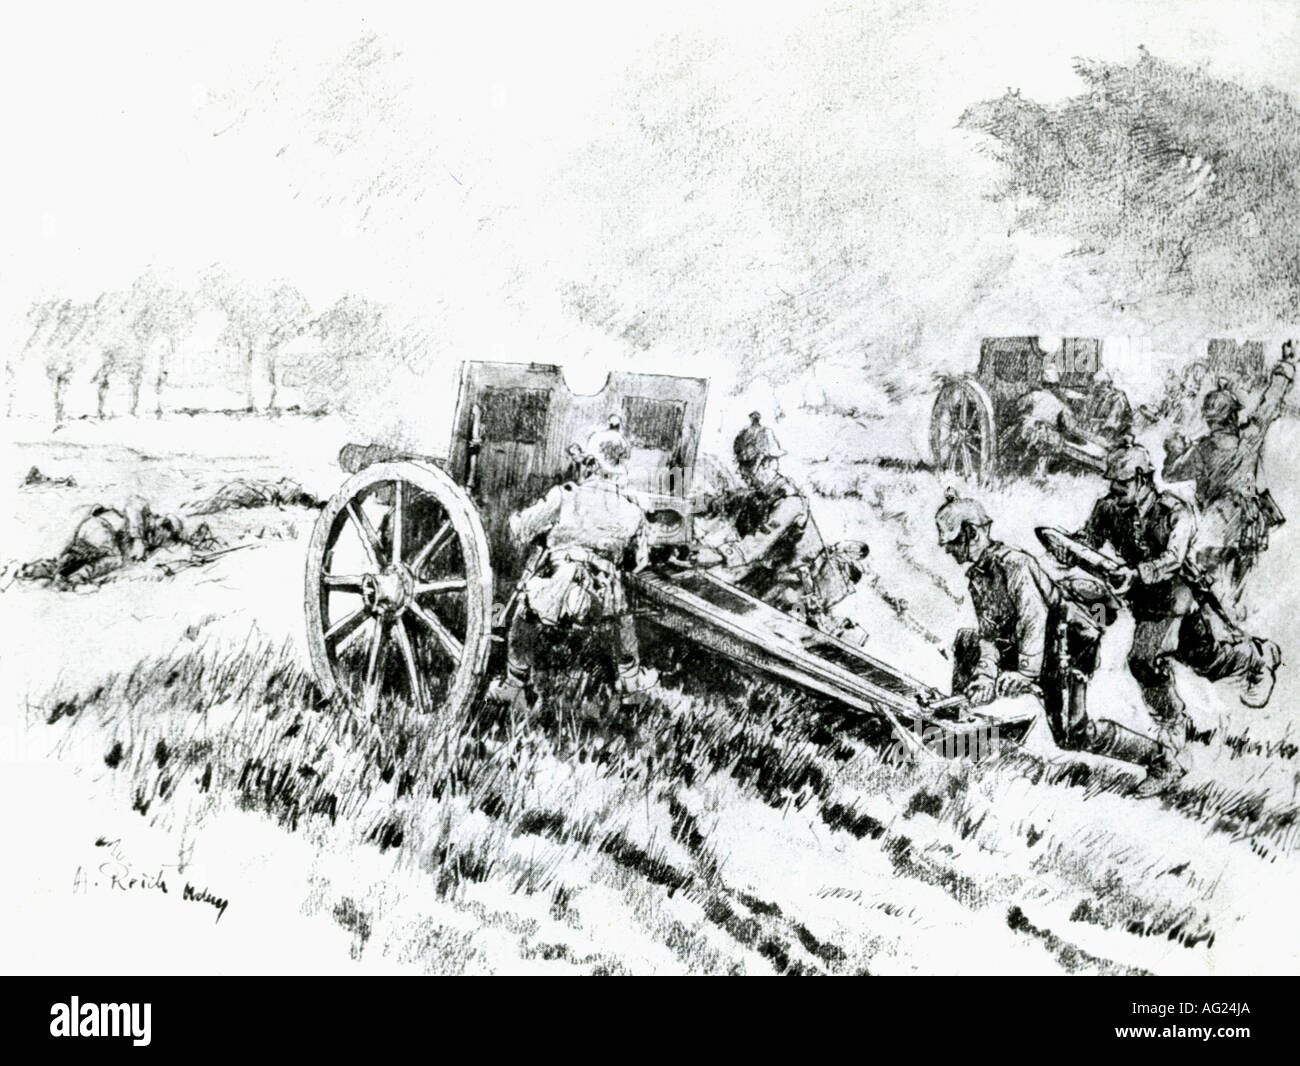 events, First World War / WWI, Western Front, German field artillery in action, 1914, Stock Photo